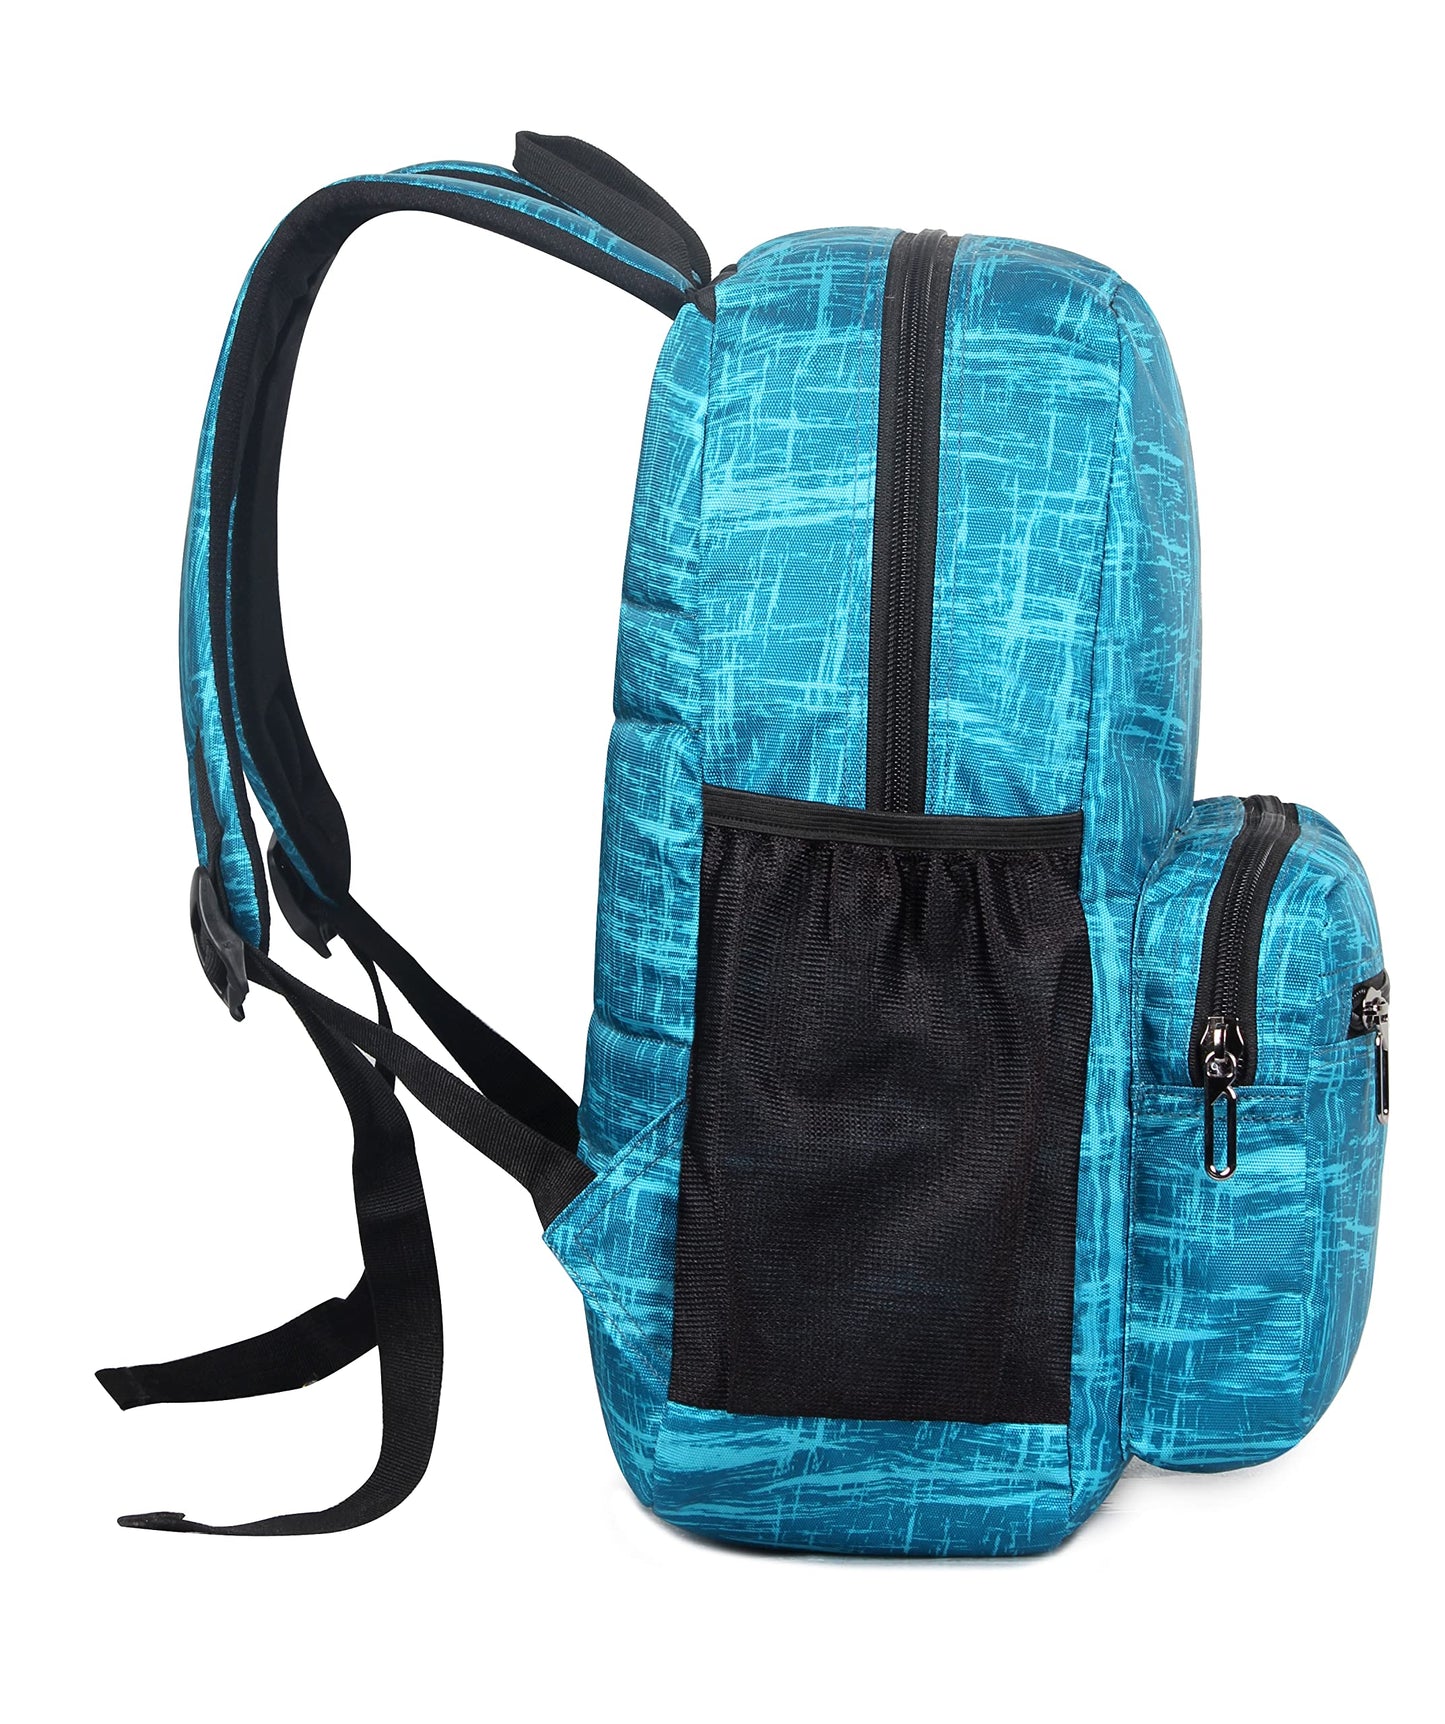 THE CLOWNFISH Marcellus Polyester 21.5 Litres Unisex Travel Laptop Backpack for 14 inch Laptop (Turquoise Blue)